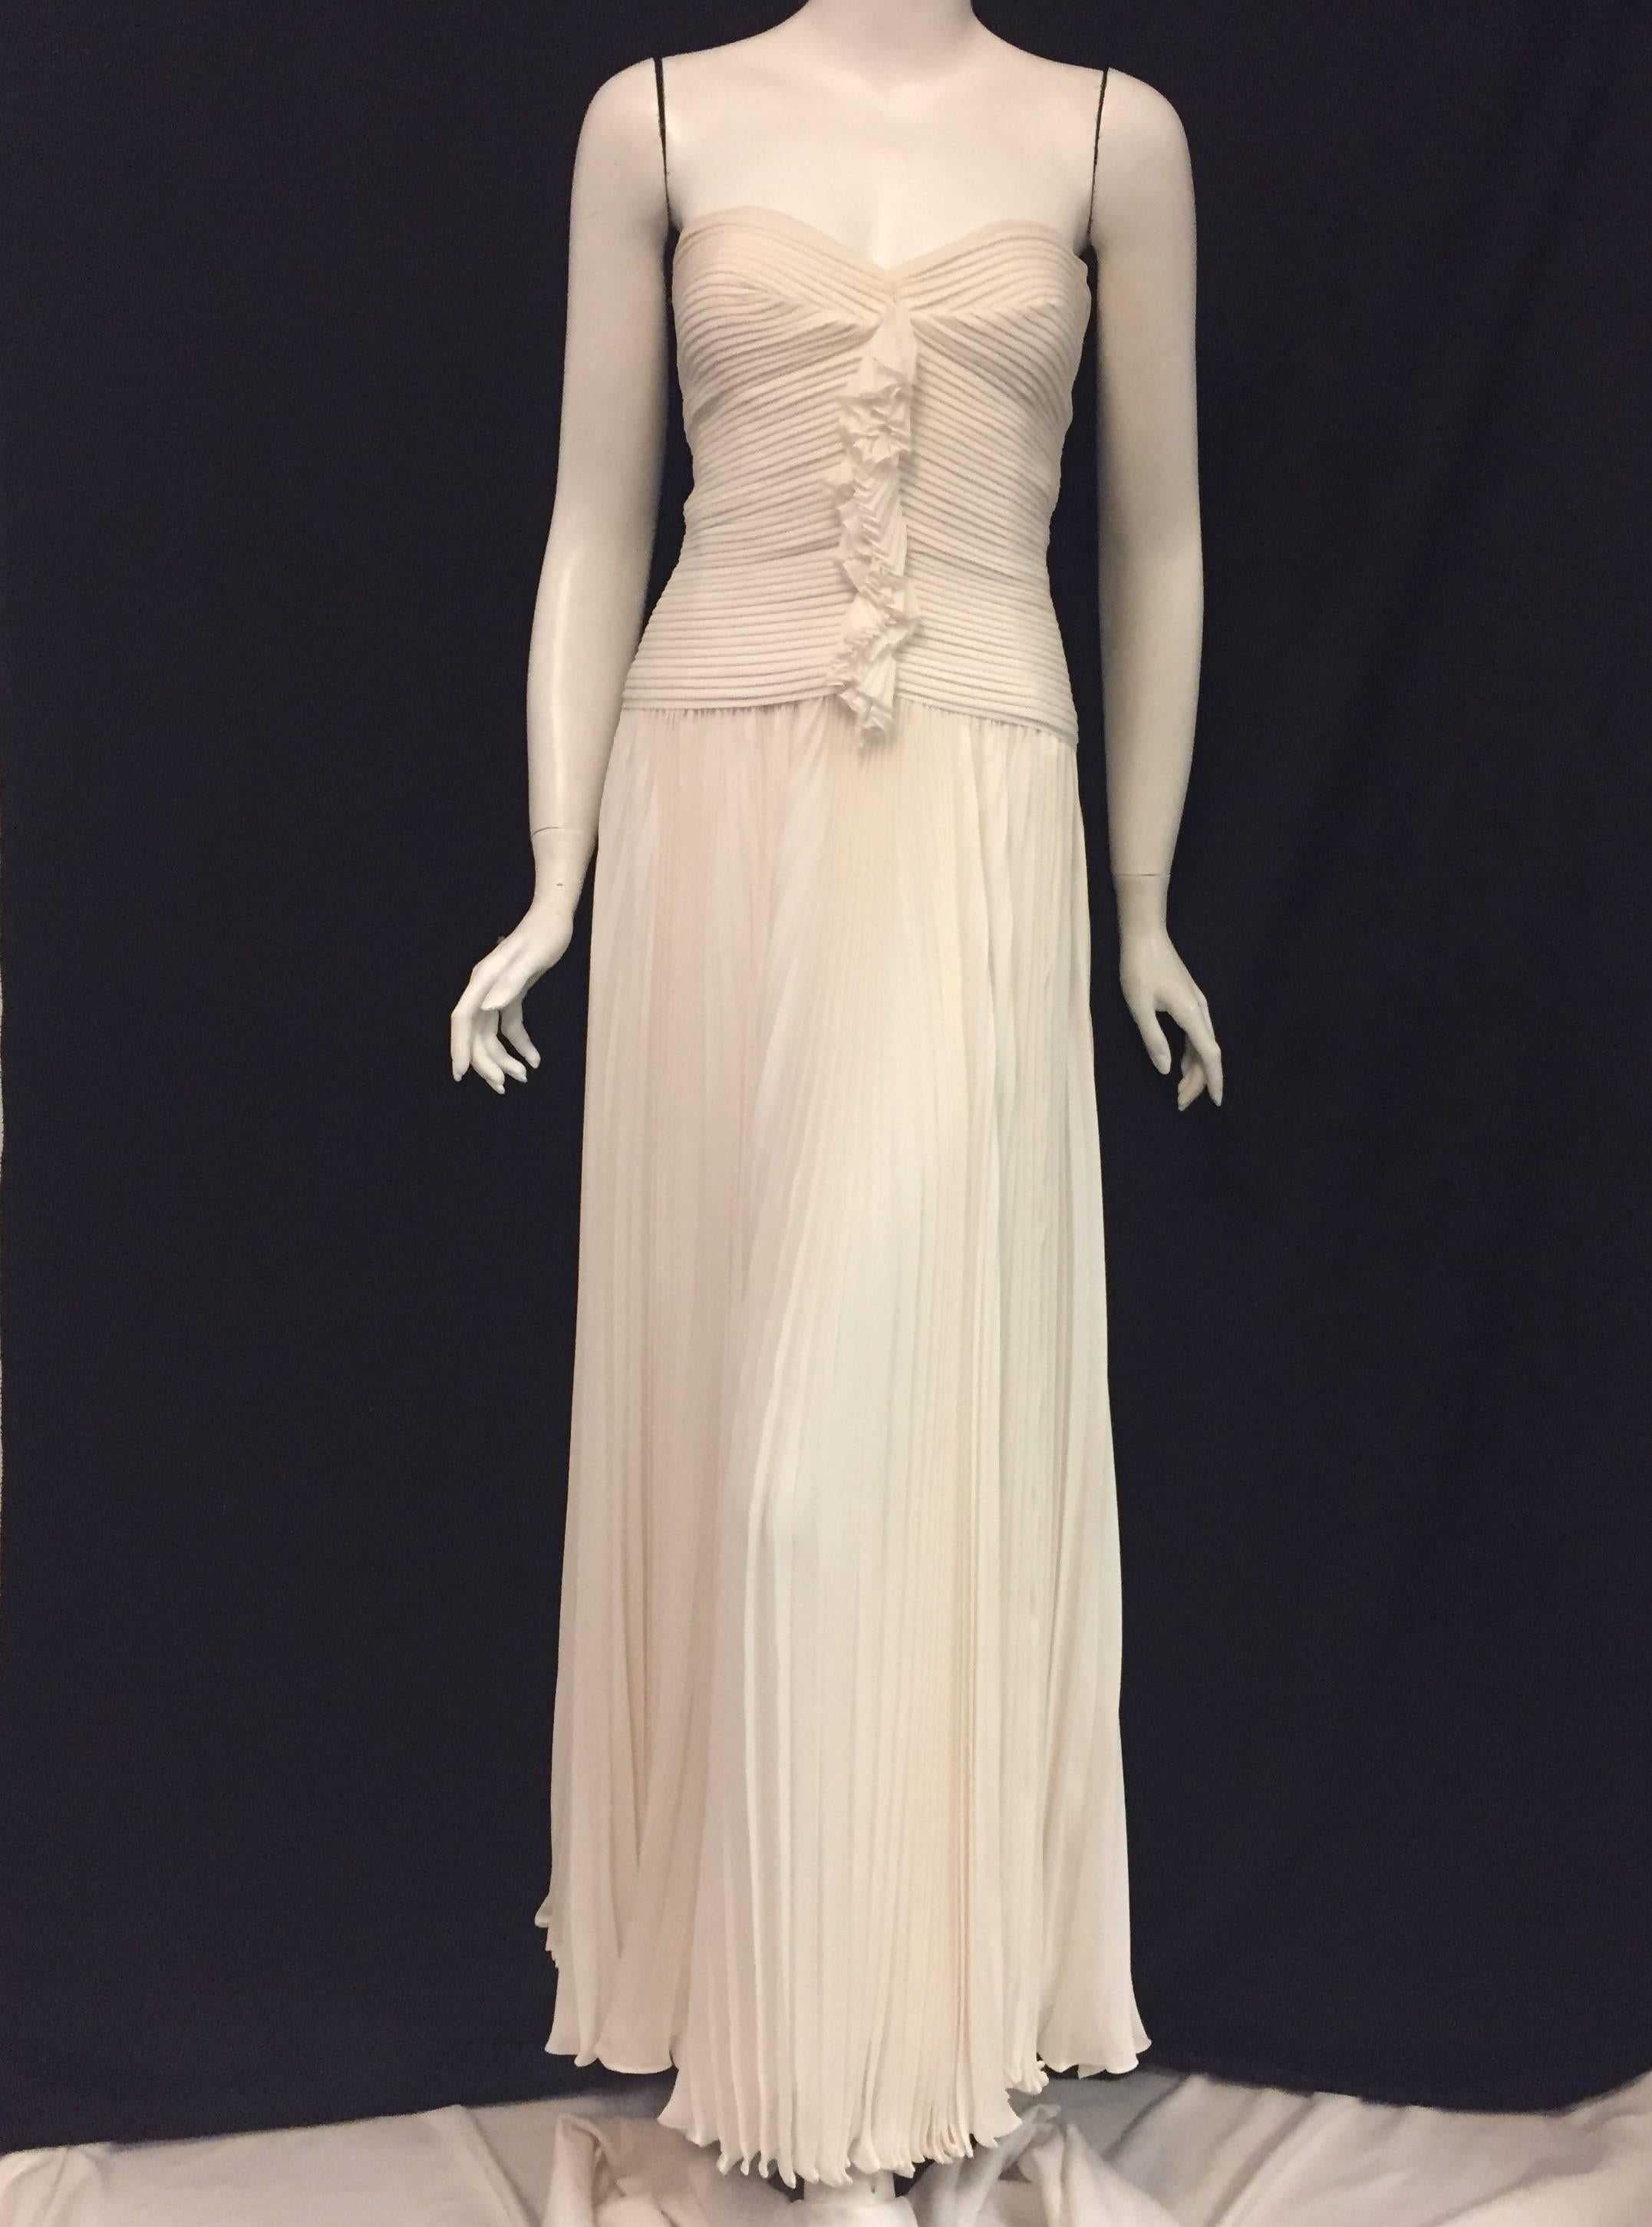 Oscar de la Renta's outstanding gown with horizontal pleats on the bodice and vertical accordion pleats on the skirt creates a flirty style dress.  The bodice is ruched at front coming down from the center of the sweetheart decolletage to the